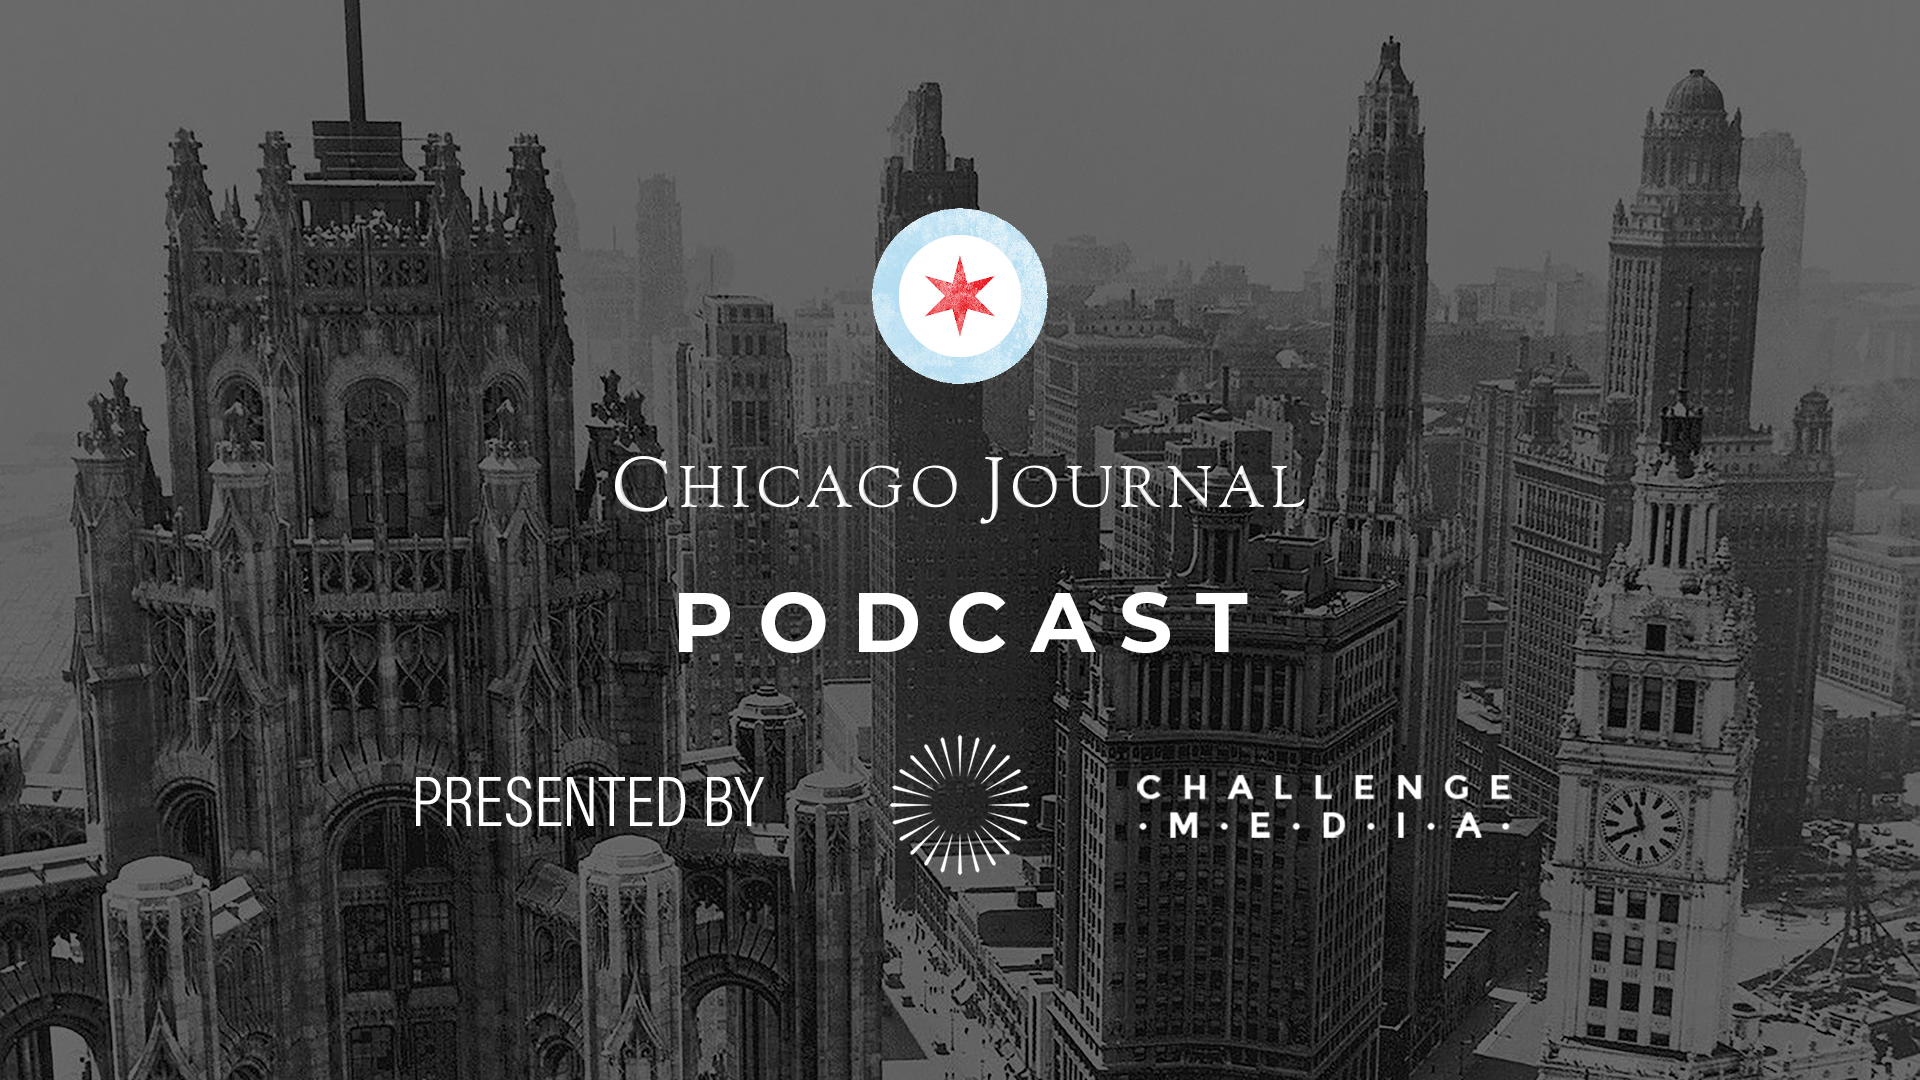 Chicago Journal Podcast: There Are Only Victims Here